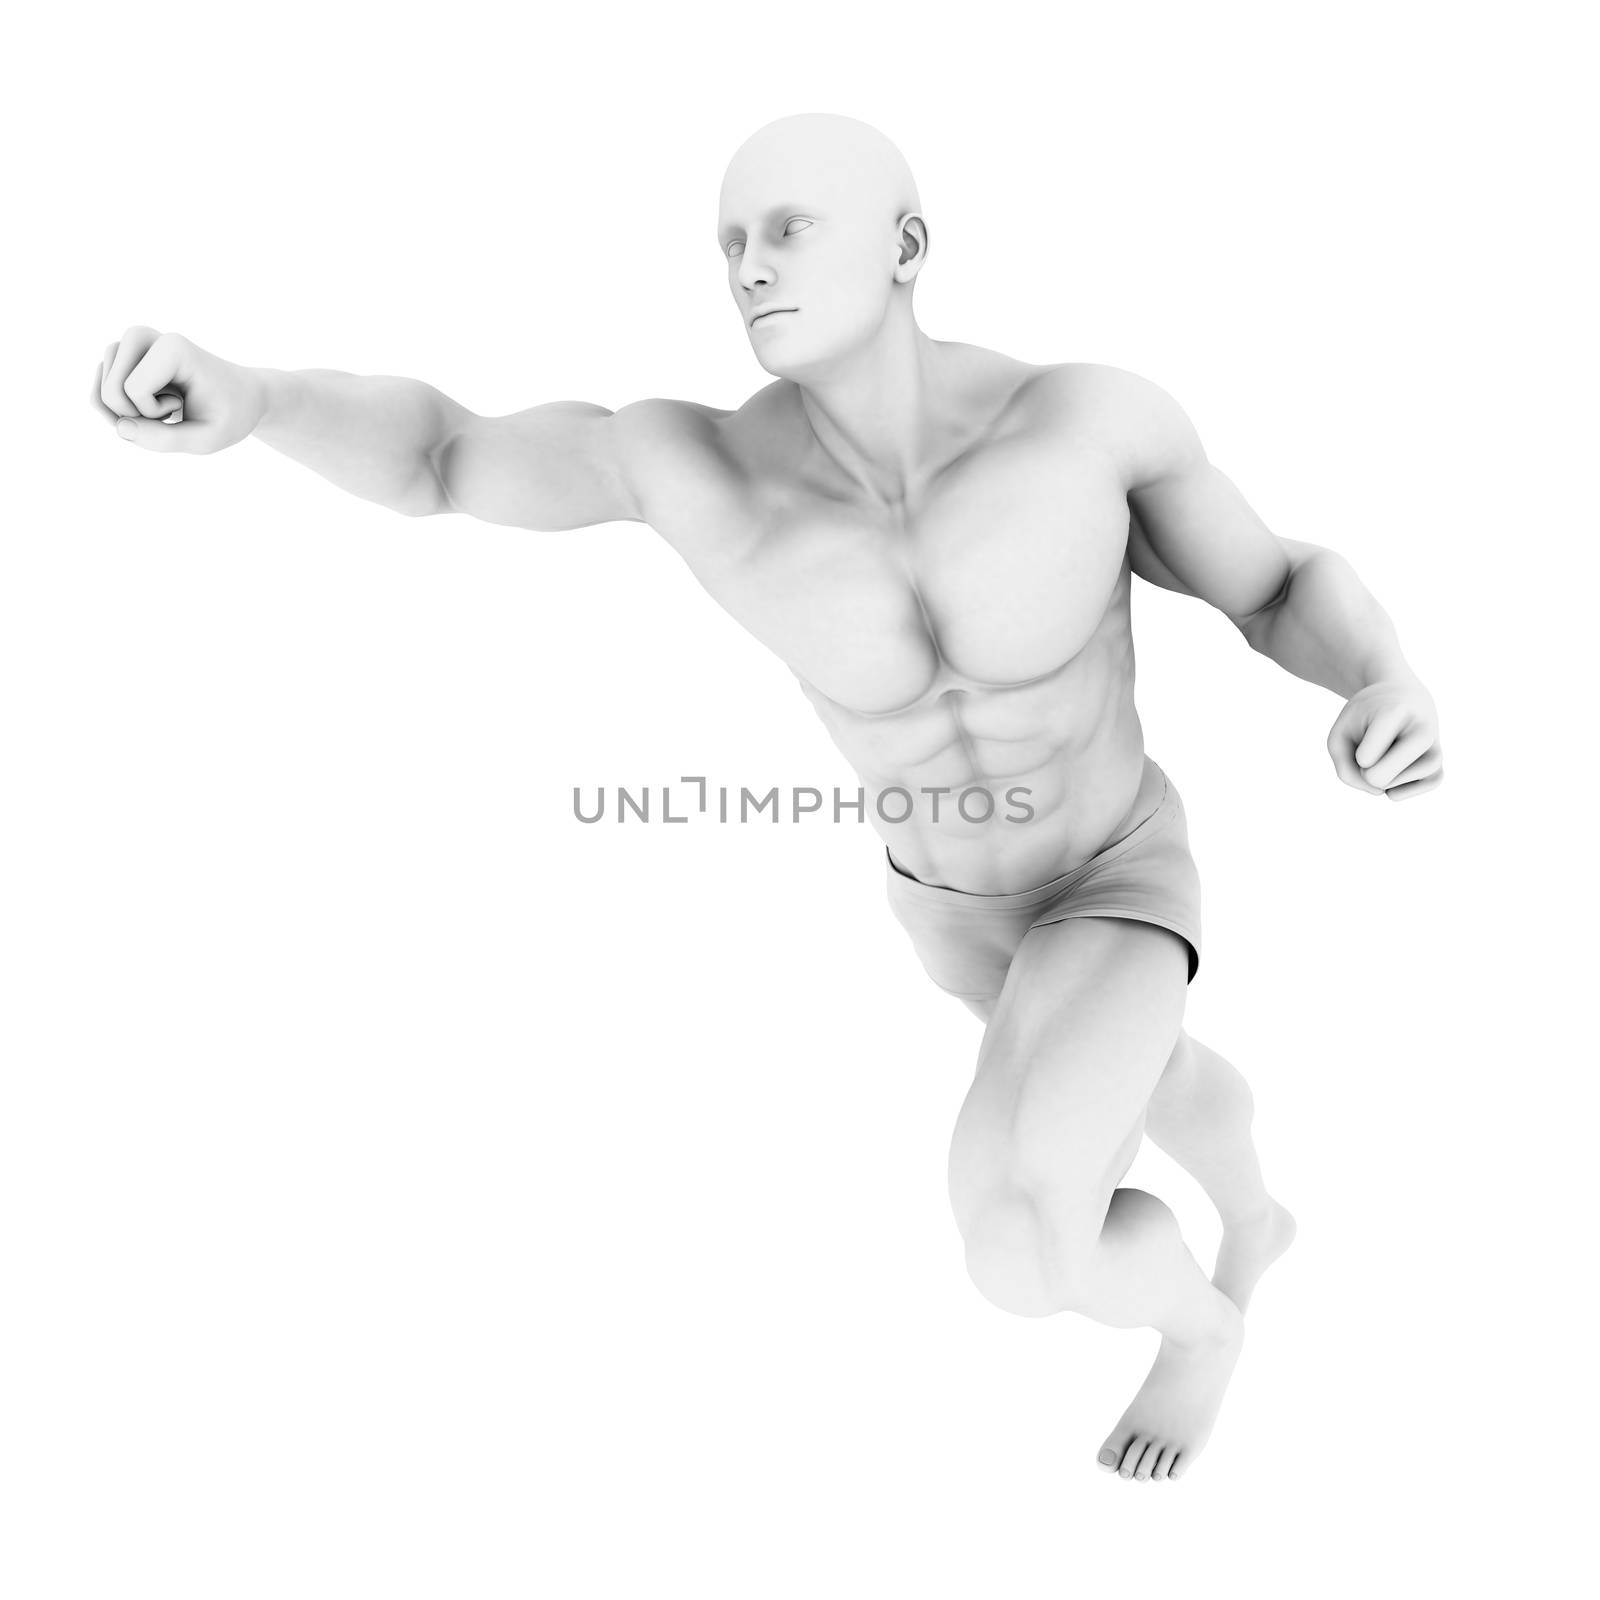 Superhero Pose With a Man in 3d Render Illustration